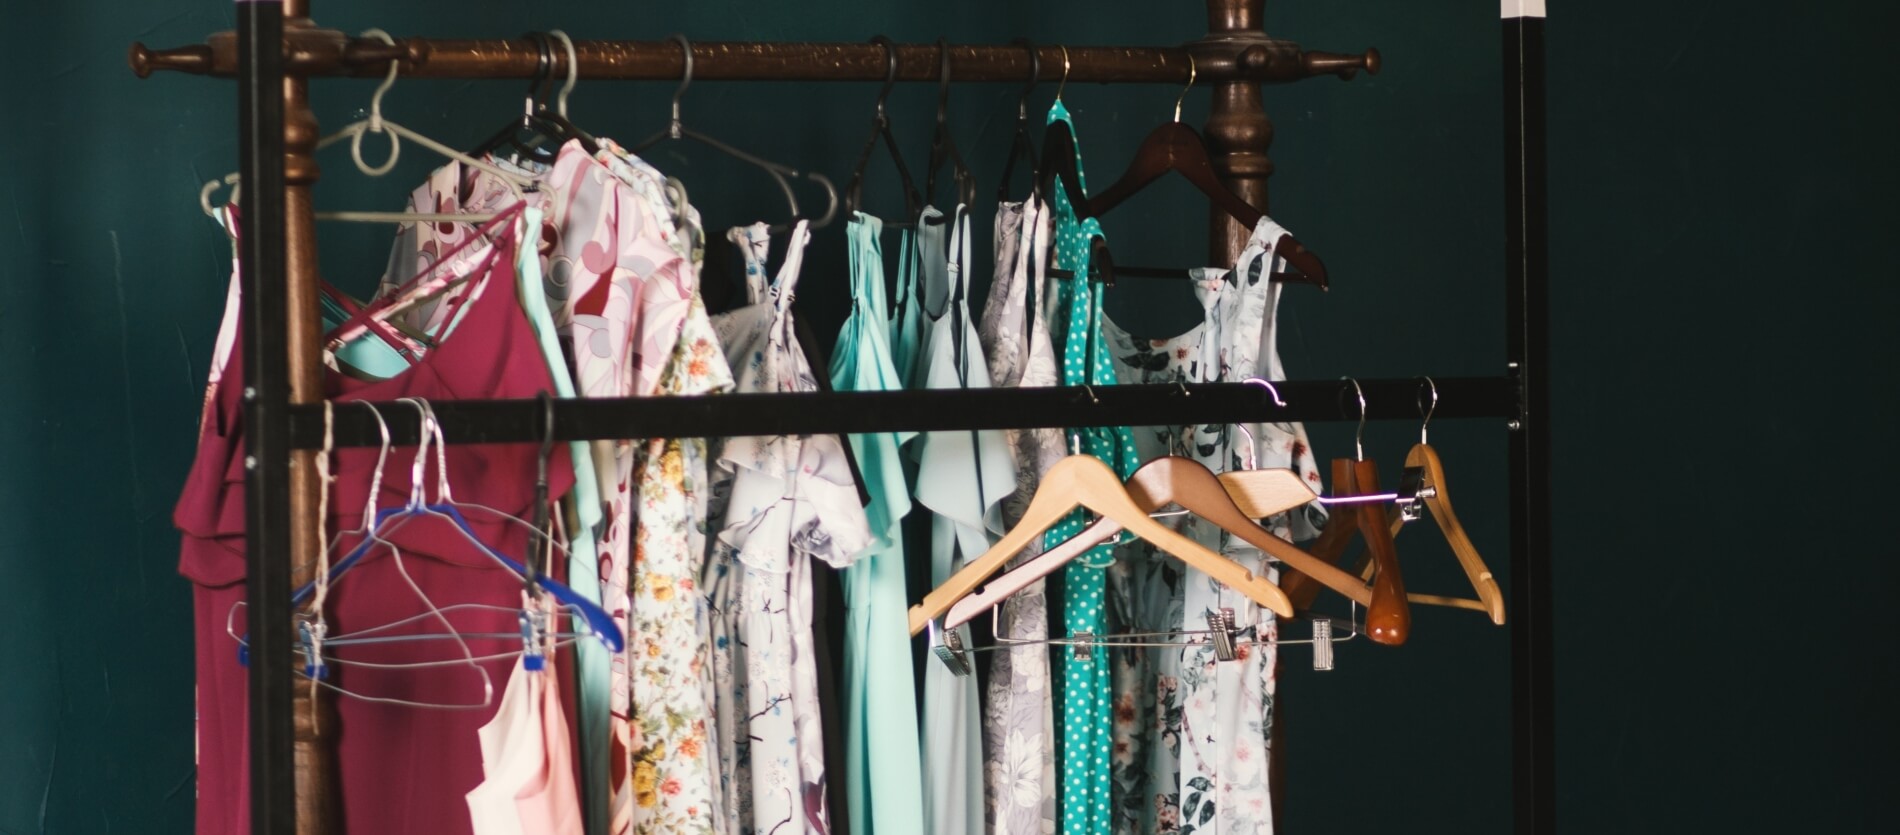 Summer dressers hanging on a wooden clothing hanger